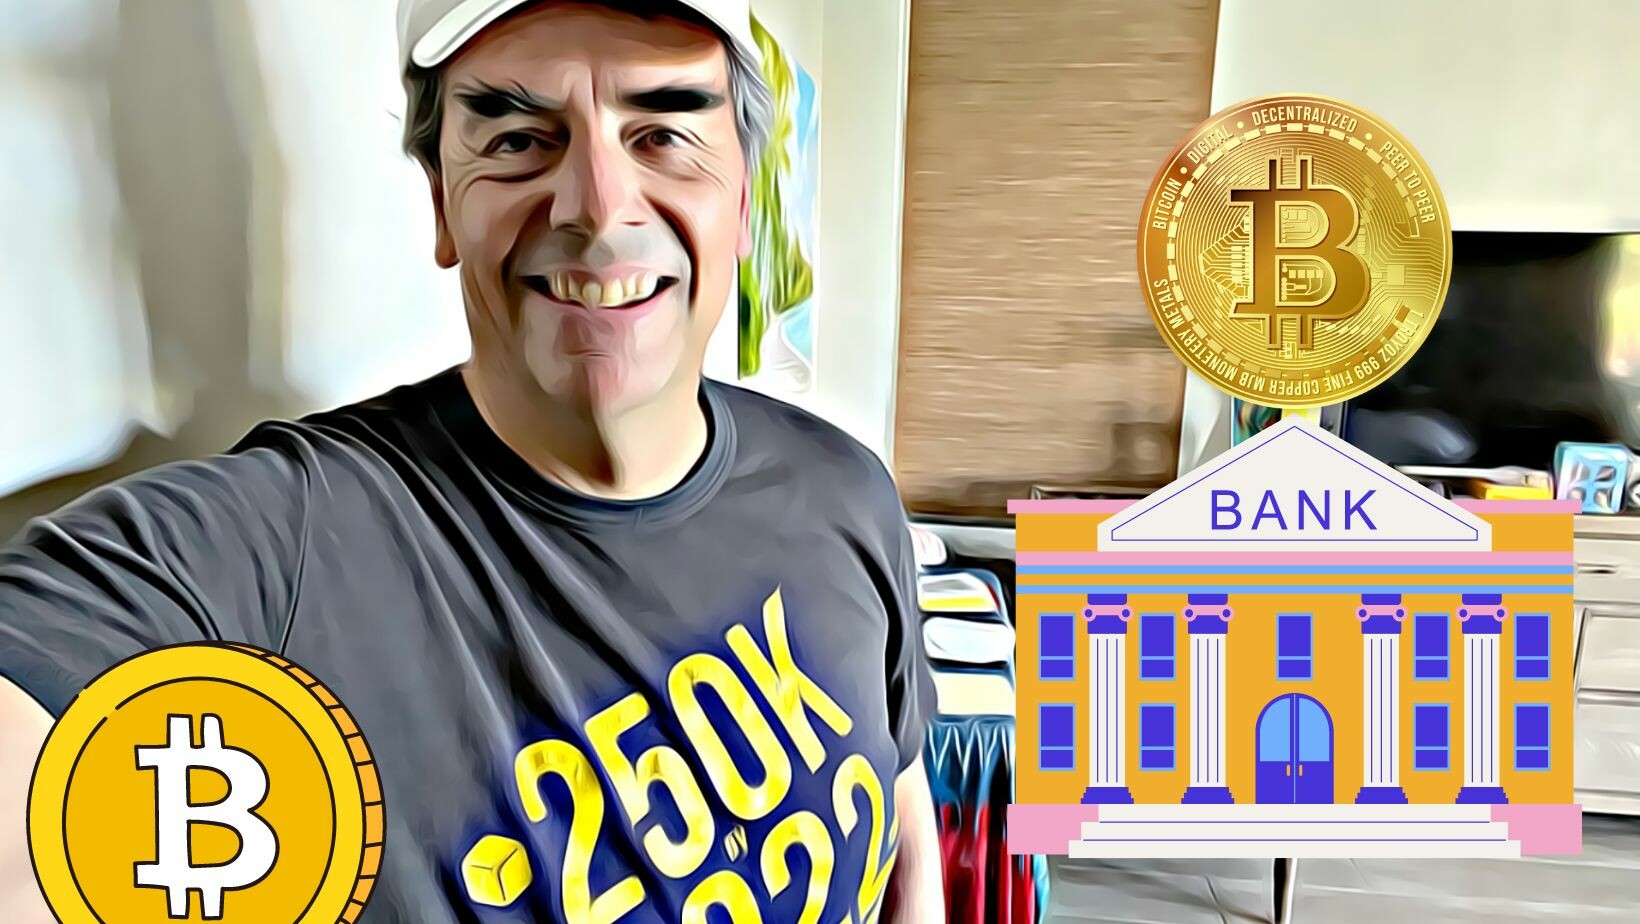 CRYPTONEWSBYTES.COM Tim-Draper-Bitcoin-banks Tim Draper Advises Businesses to Hold Two Payrolls Worth of Cash in Crypto as a Hedge  